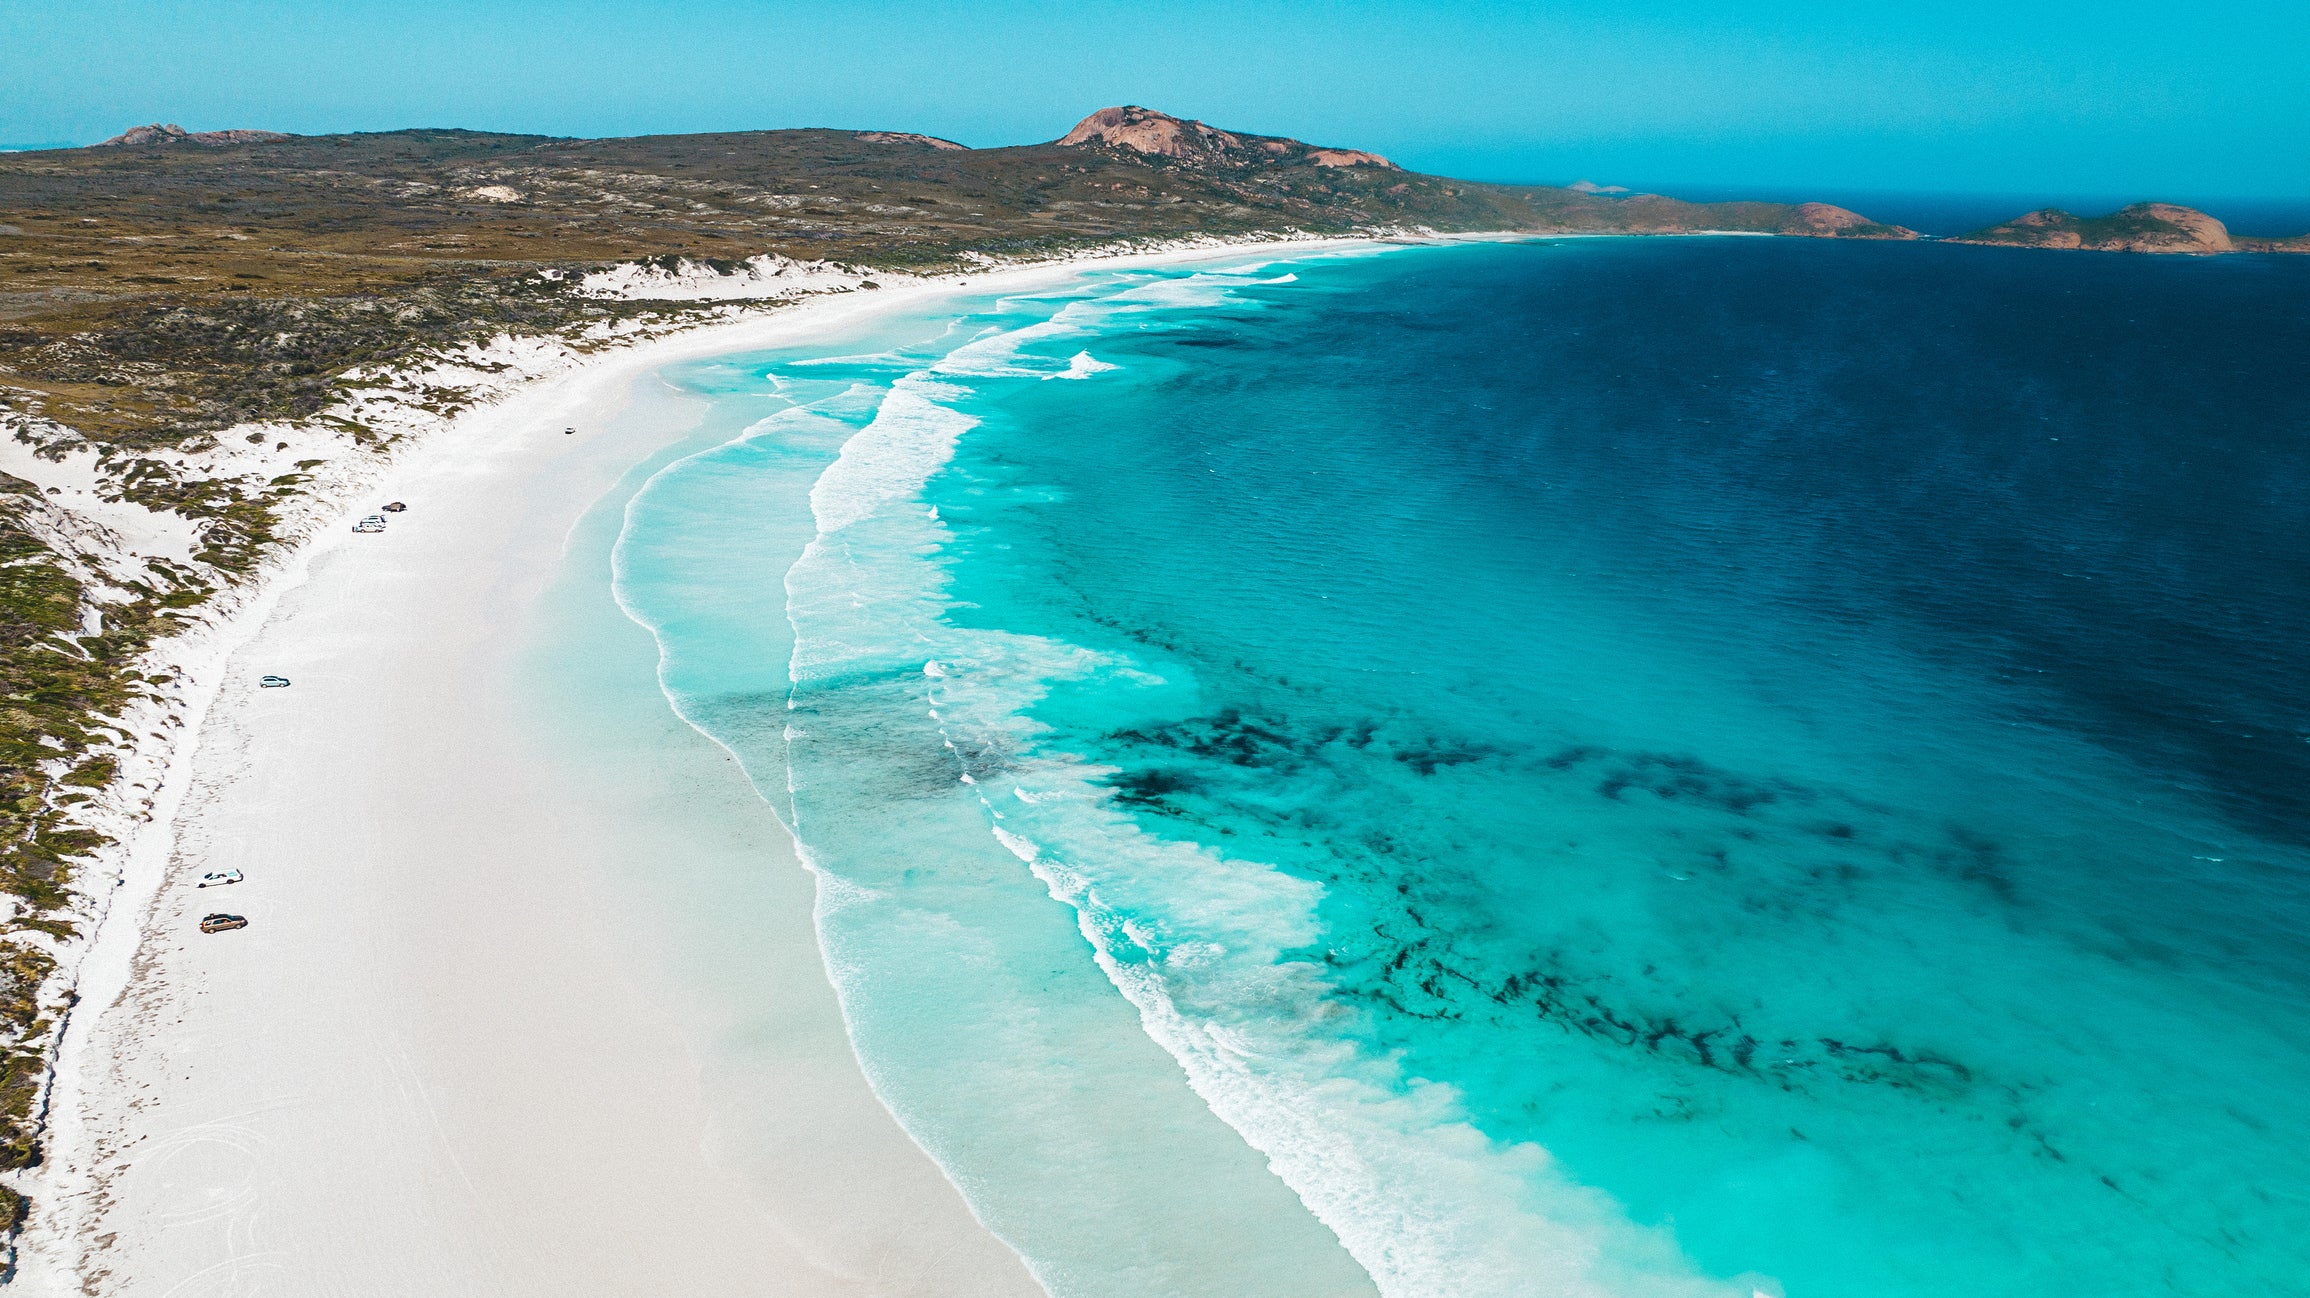 The Esperance inlet, Lucky Bay, has blinding white sands and a whole palette of turquoise waters